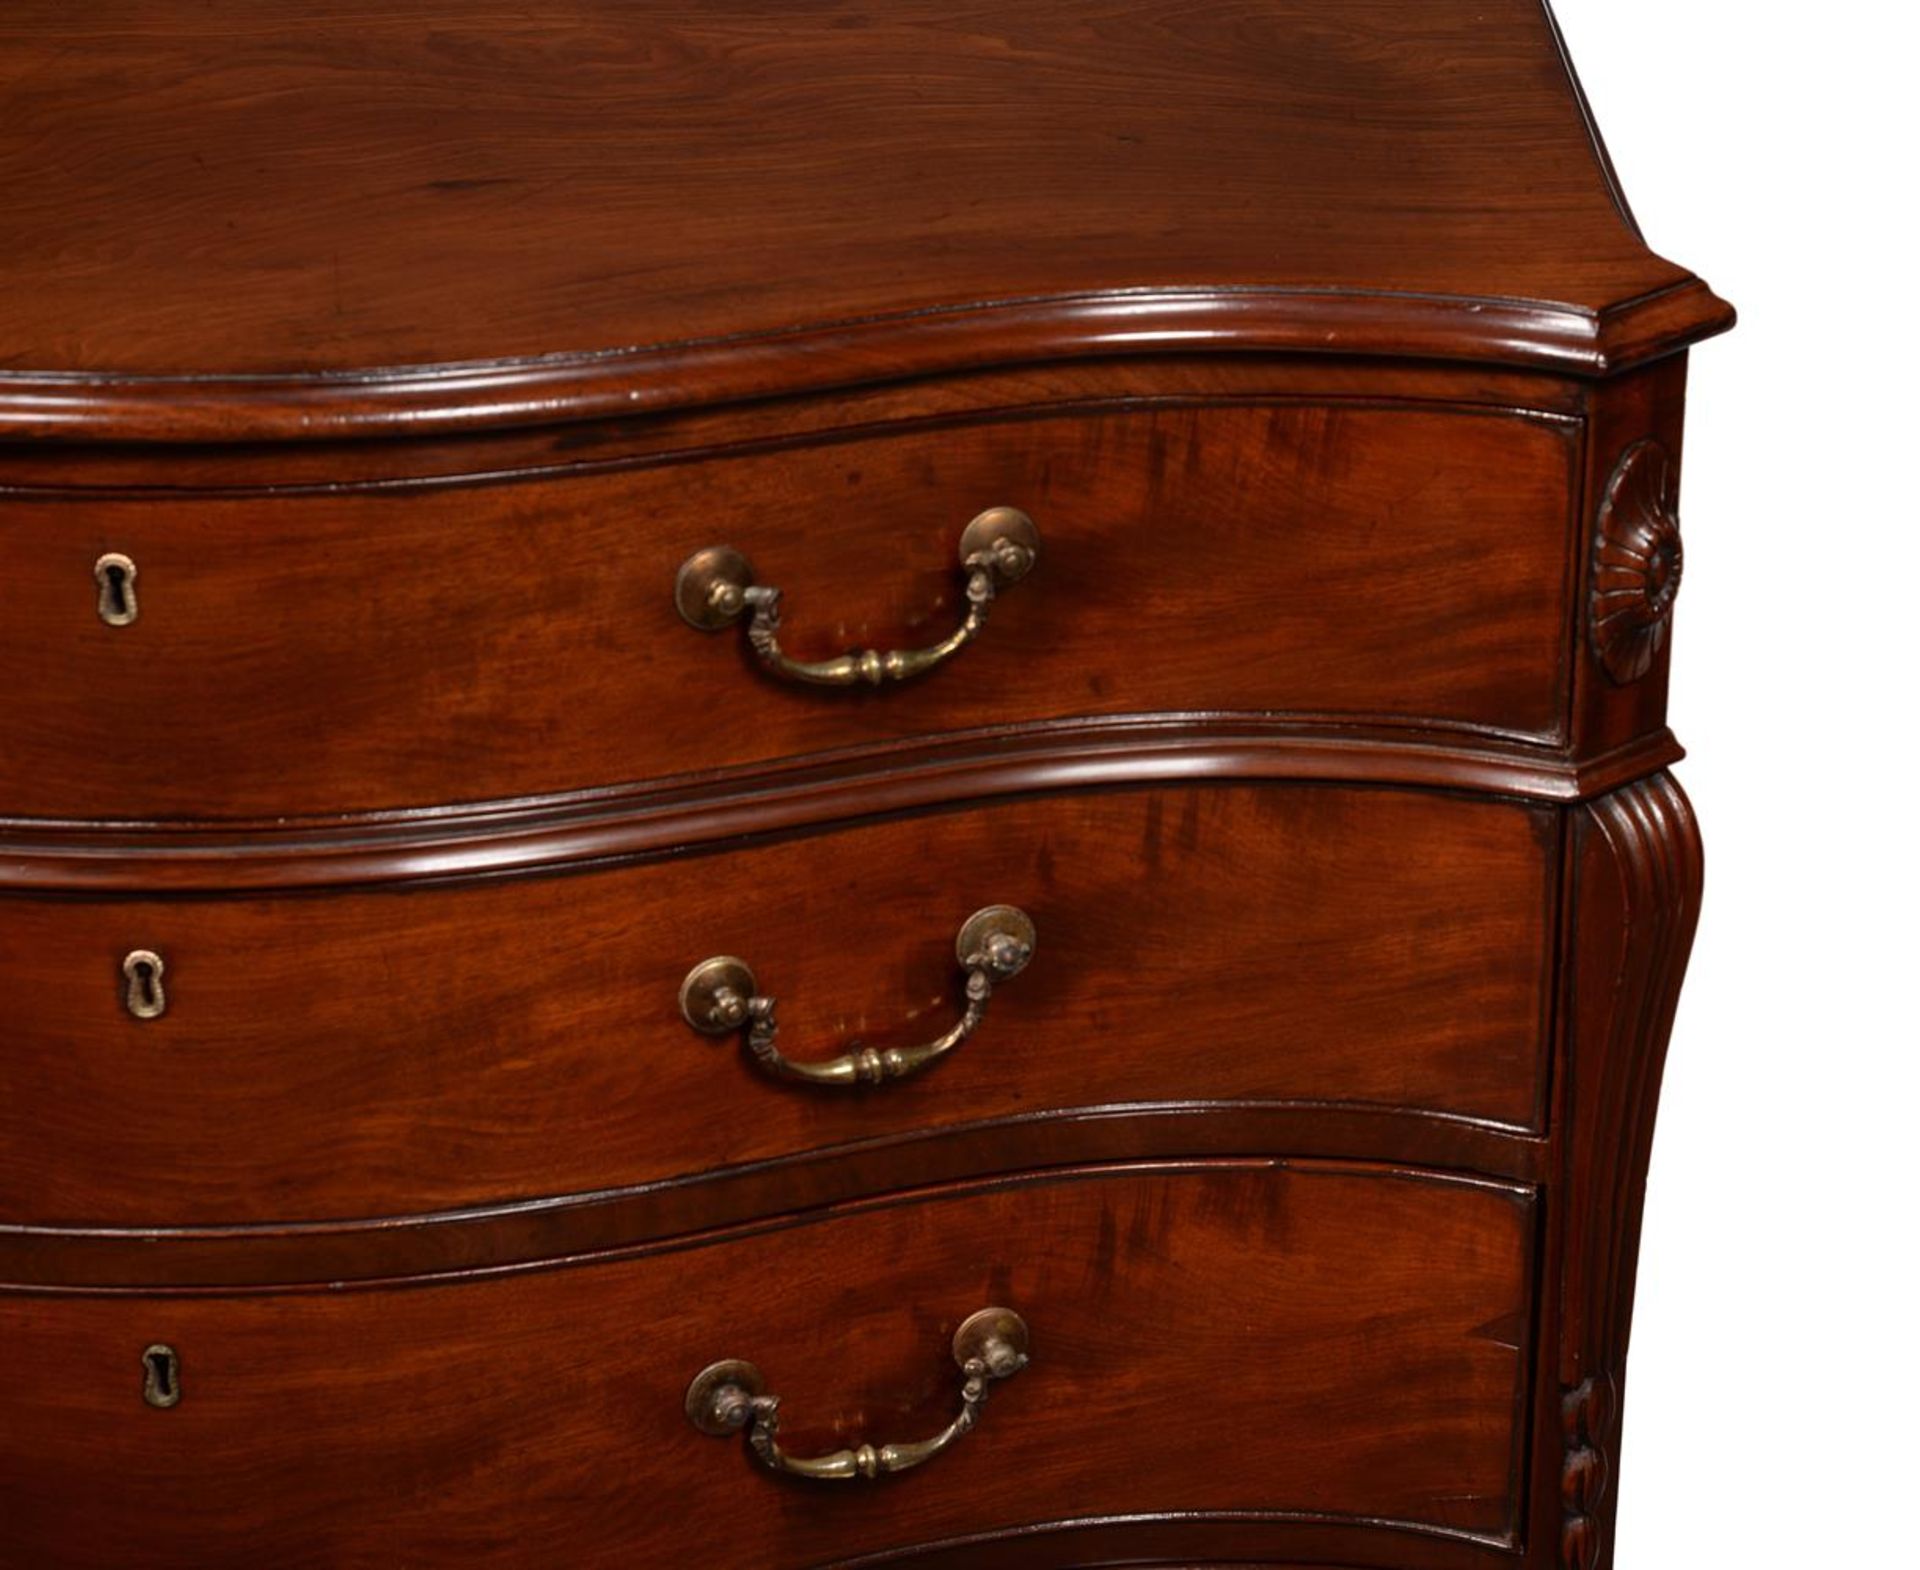 A GEORGE III MAHOGANY SERPENTINE COMMODE, IN THE MANNER OF THOMAS CHIPPENDALE, CIRCA 1770 - Image 8 of 9